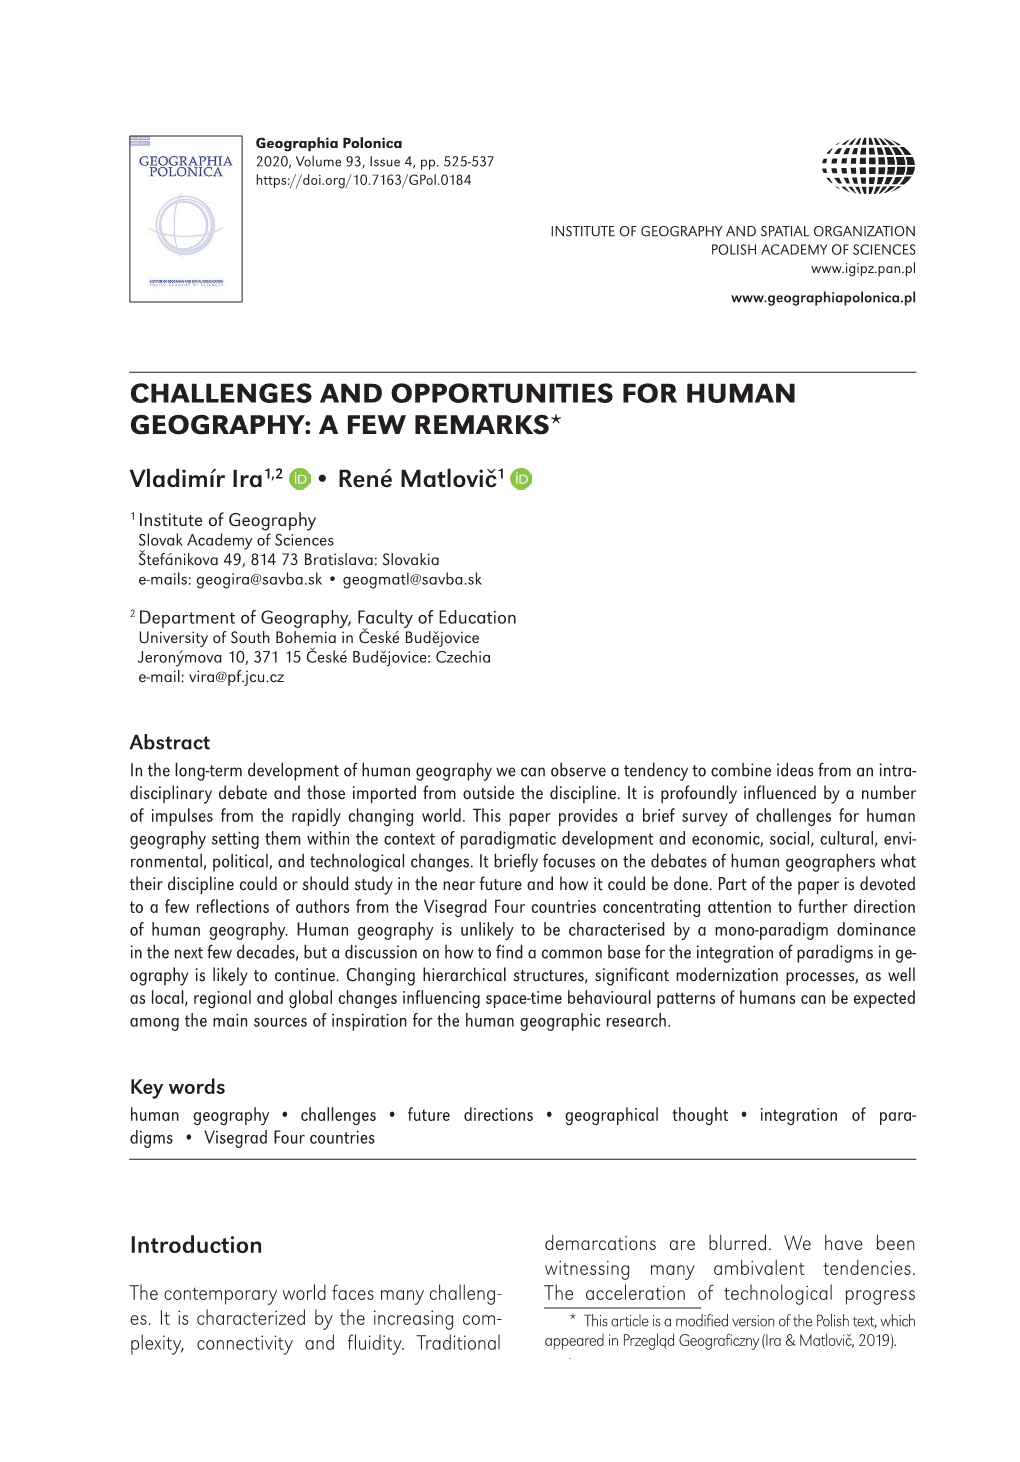 Geographia Polonica Vol. 93 No. 4 (2020), Challenges and Opportunities for Human Geography: a Few Remarks